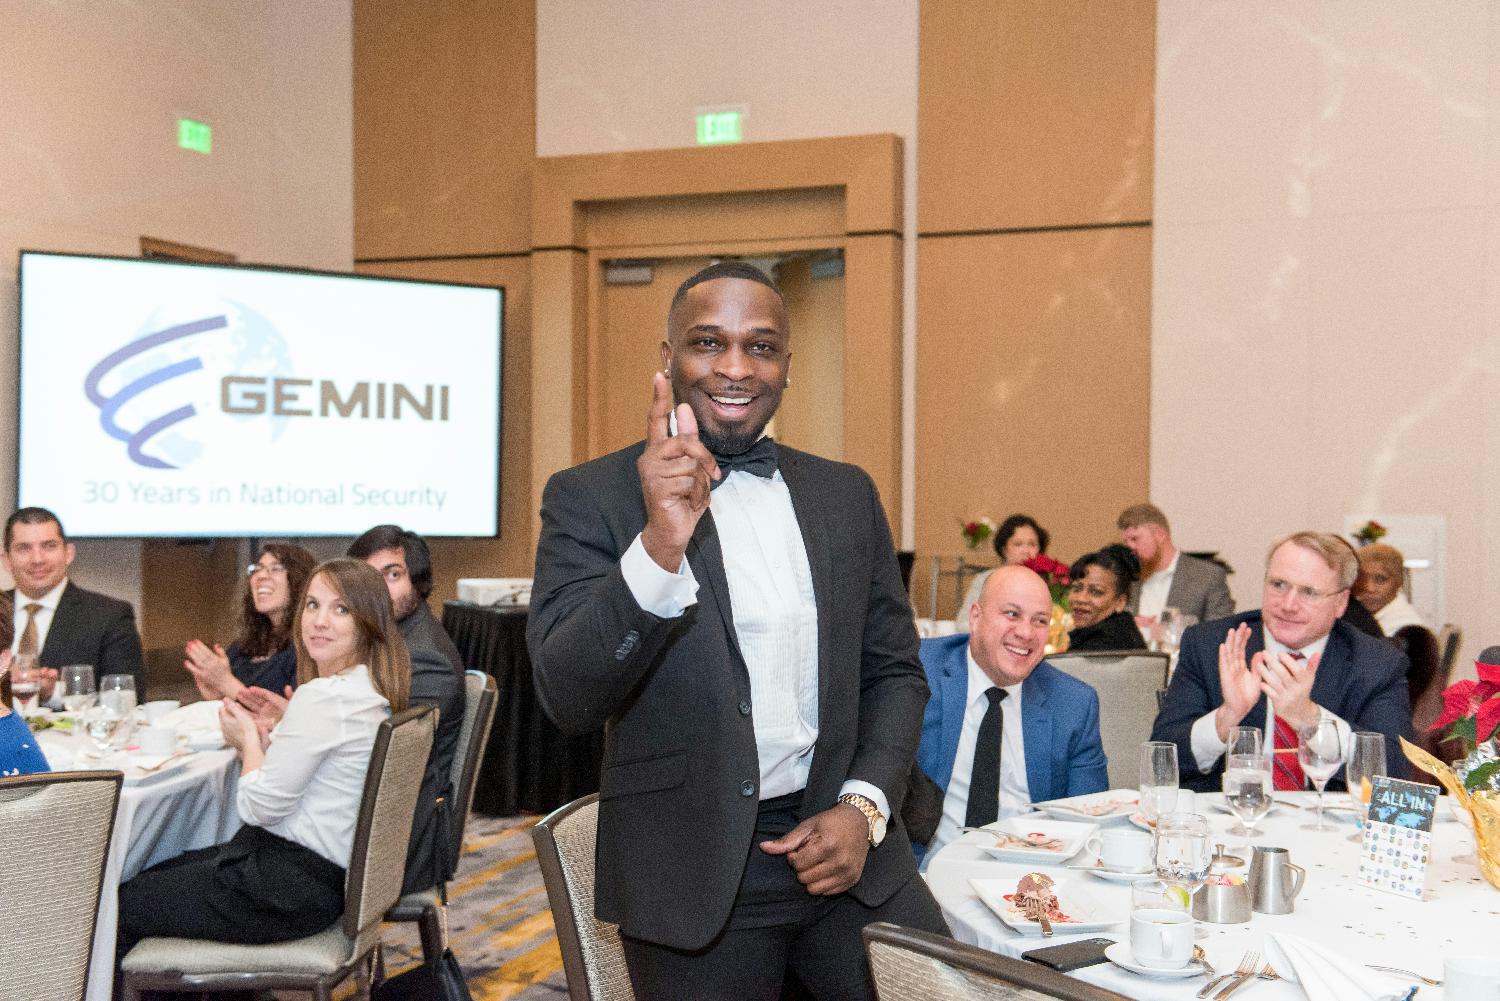 Gemini annual celebrations honor superior performers and team accomplishments!